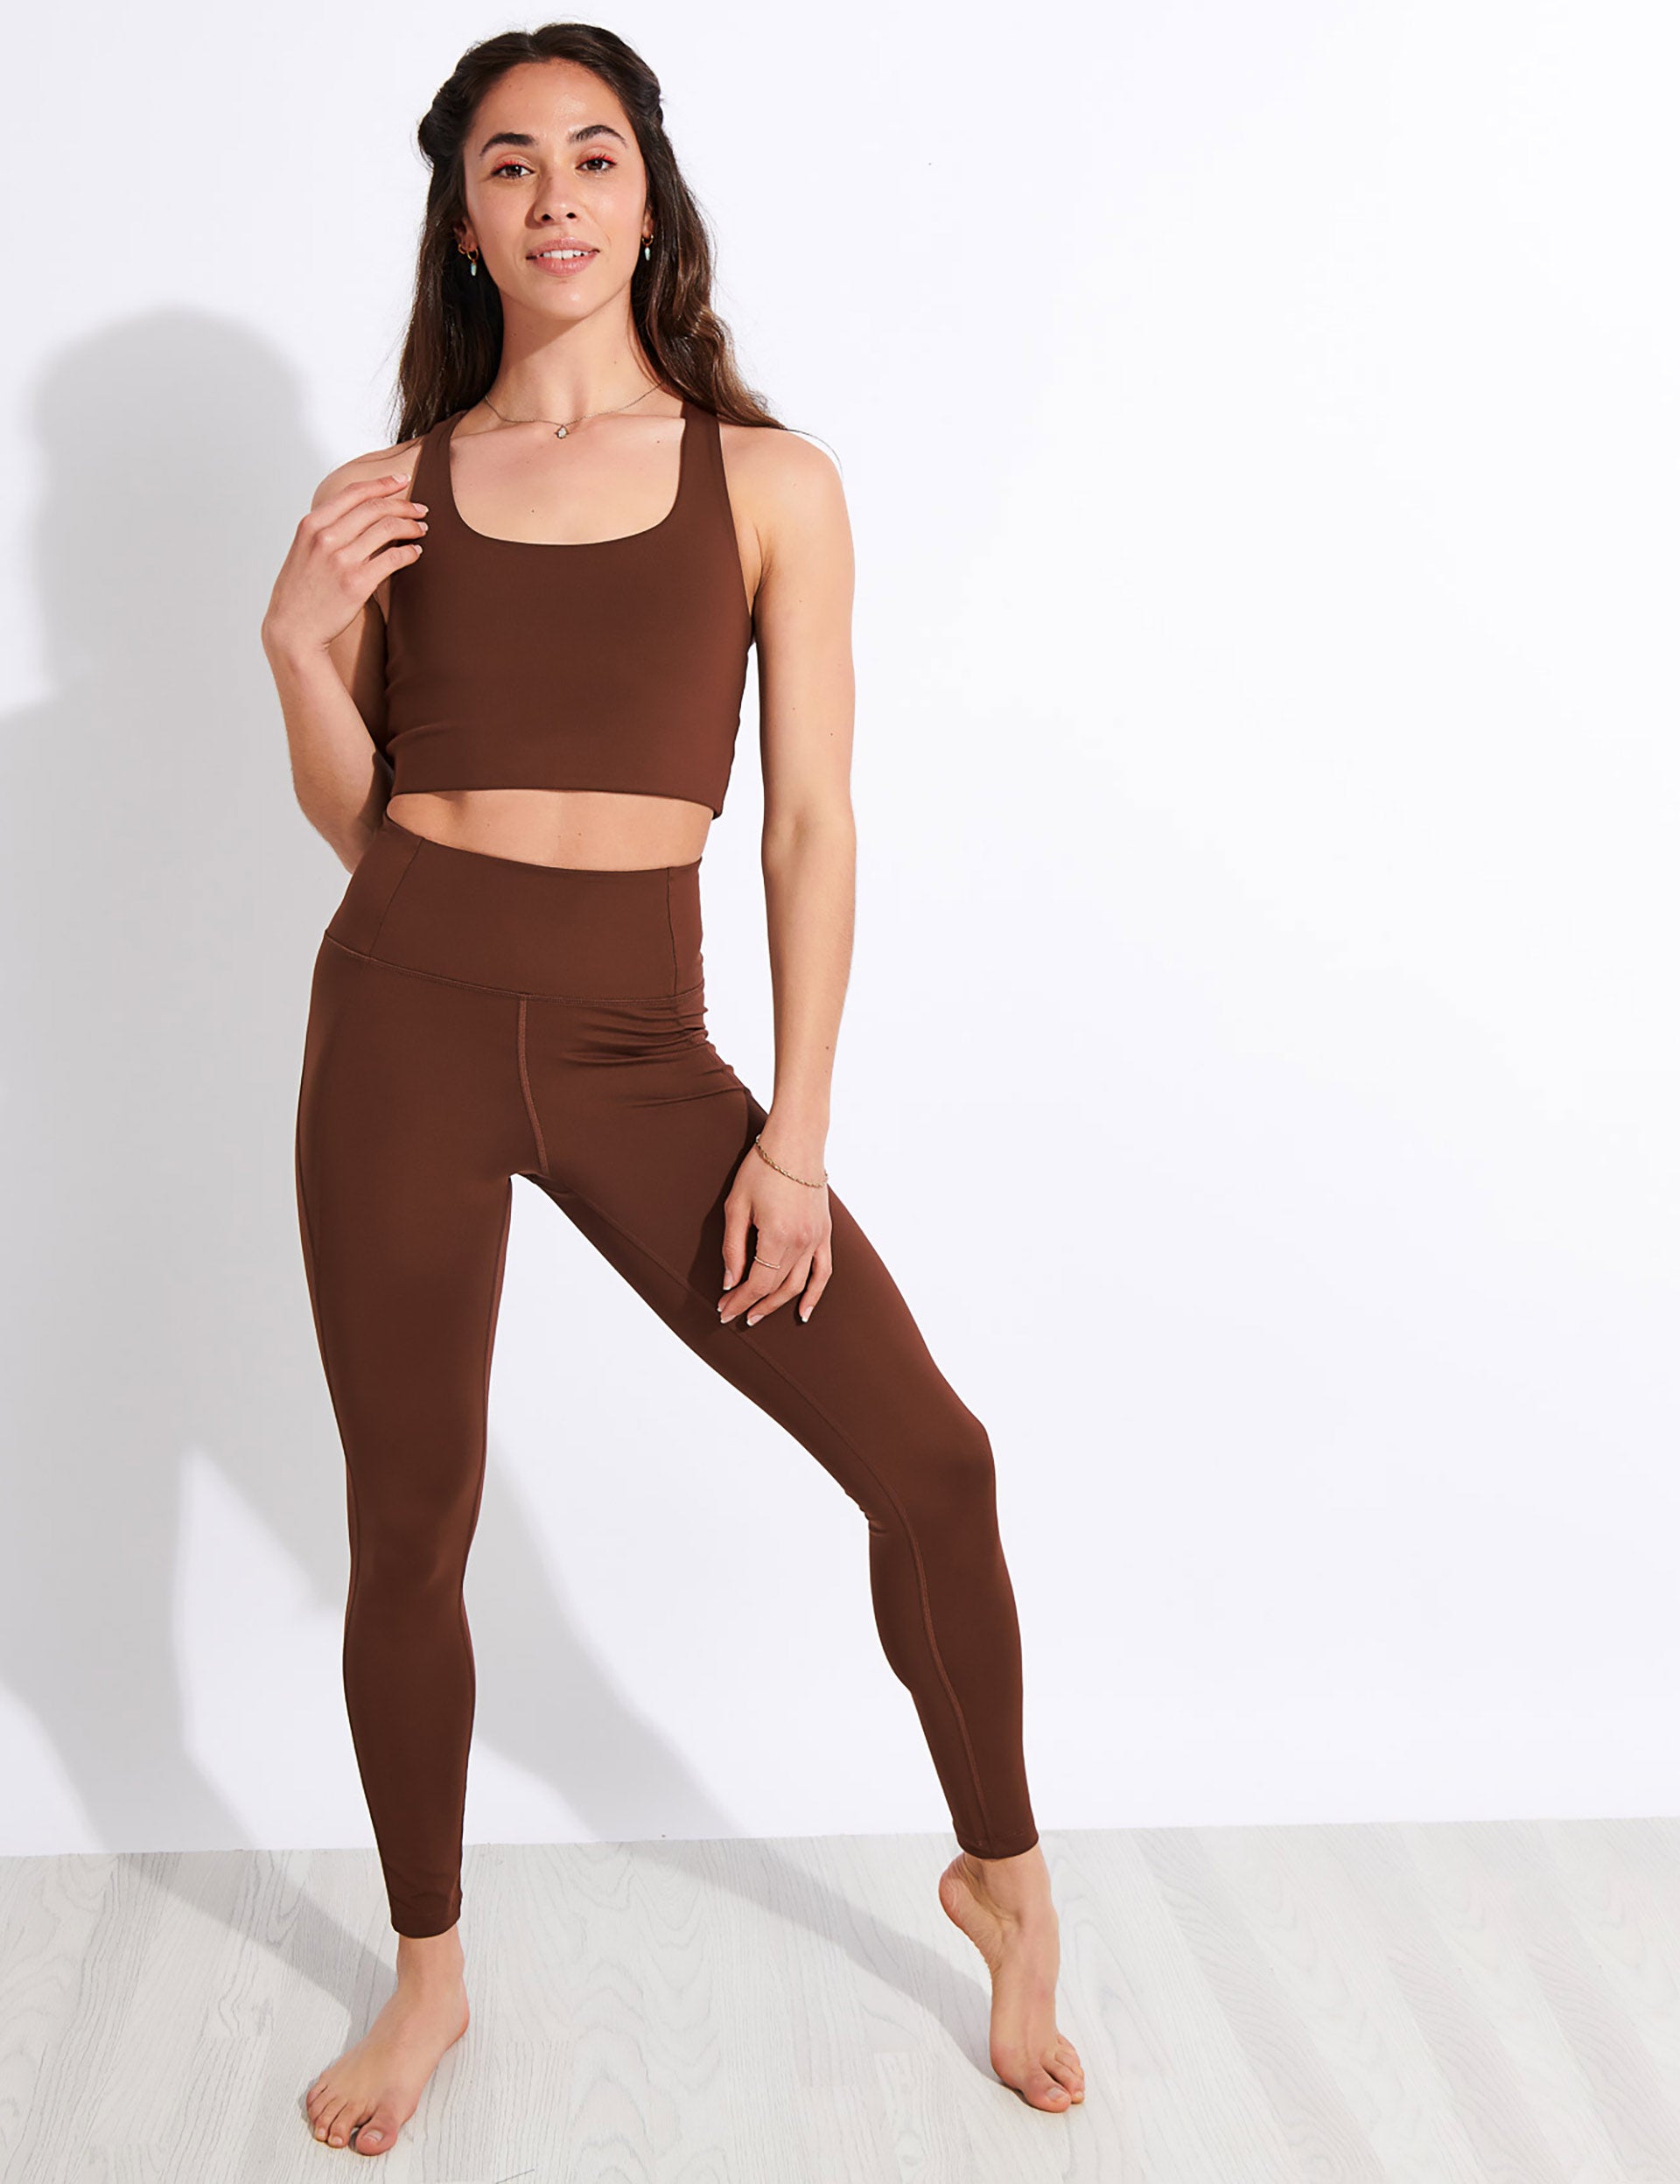 Girlfriend Collective Compressive High Rise Long Leggings